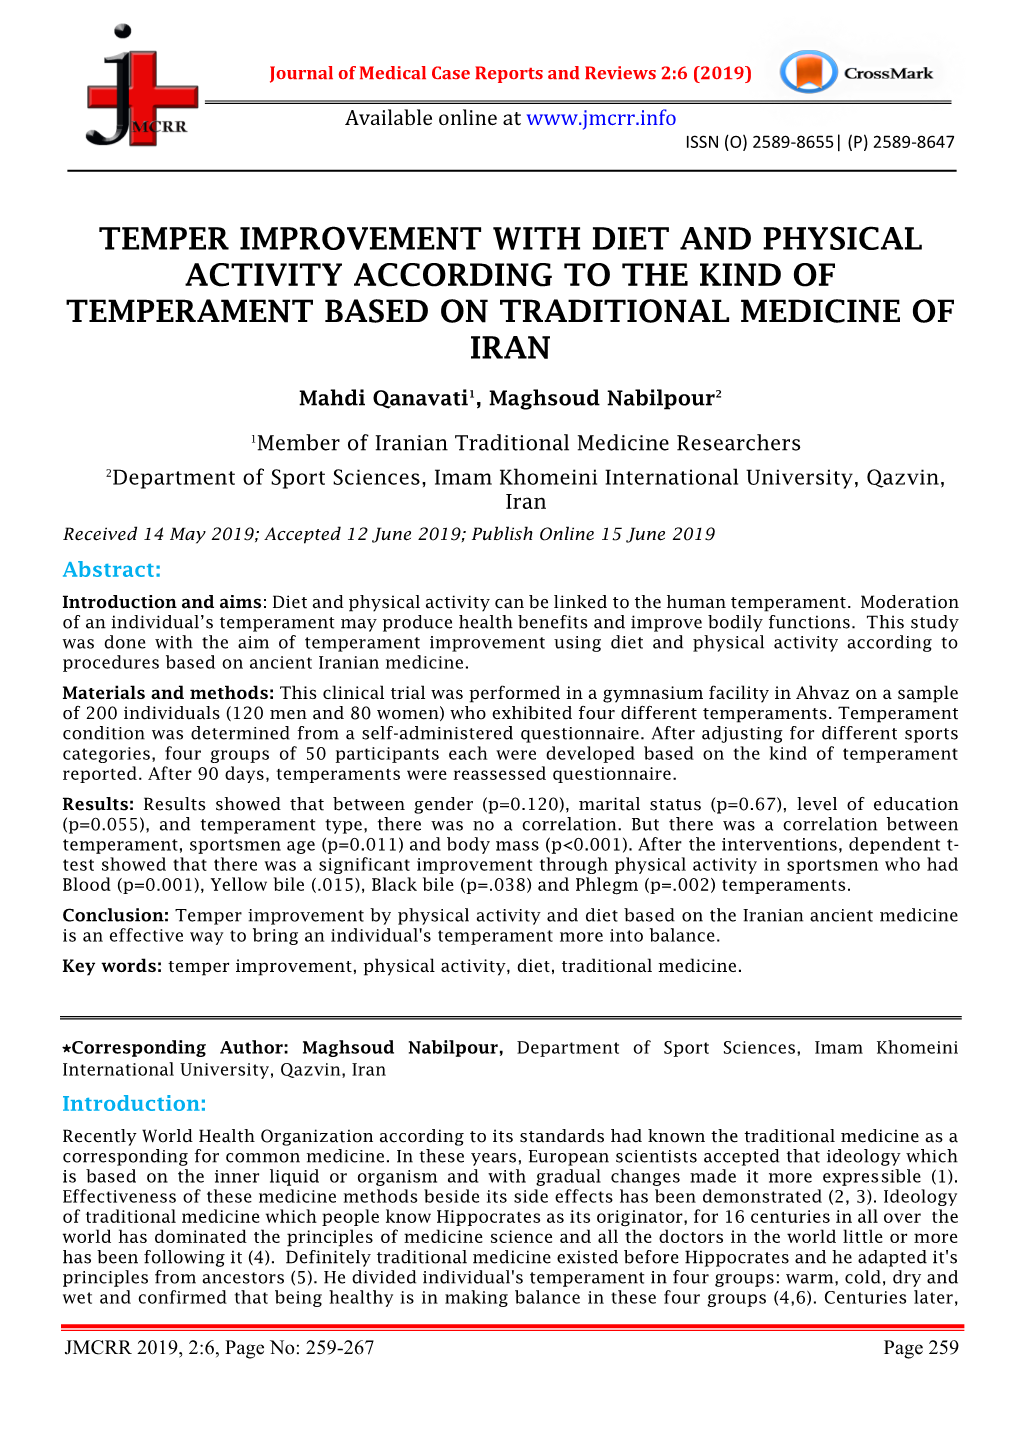 Temper Improvement with Diet and Physical Activity According to the Kind of Temperament Based on Traditional Medicine of Iran